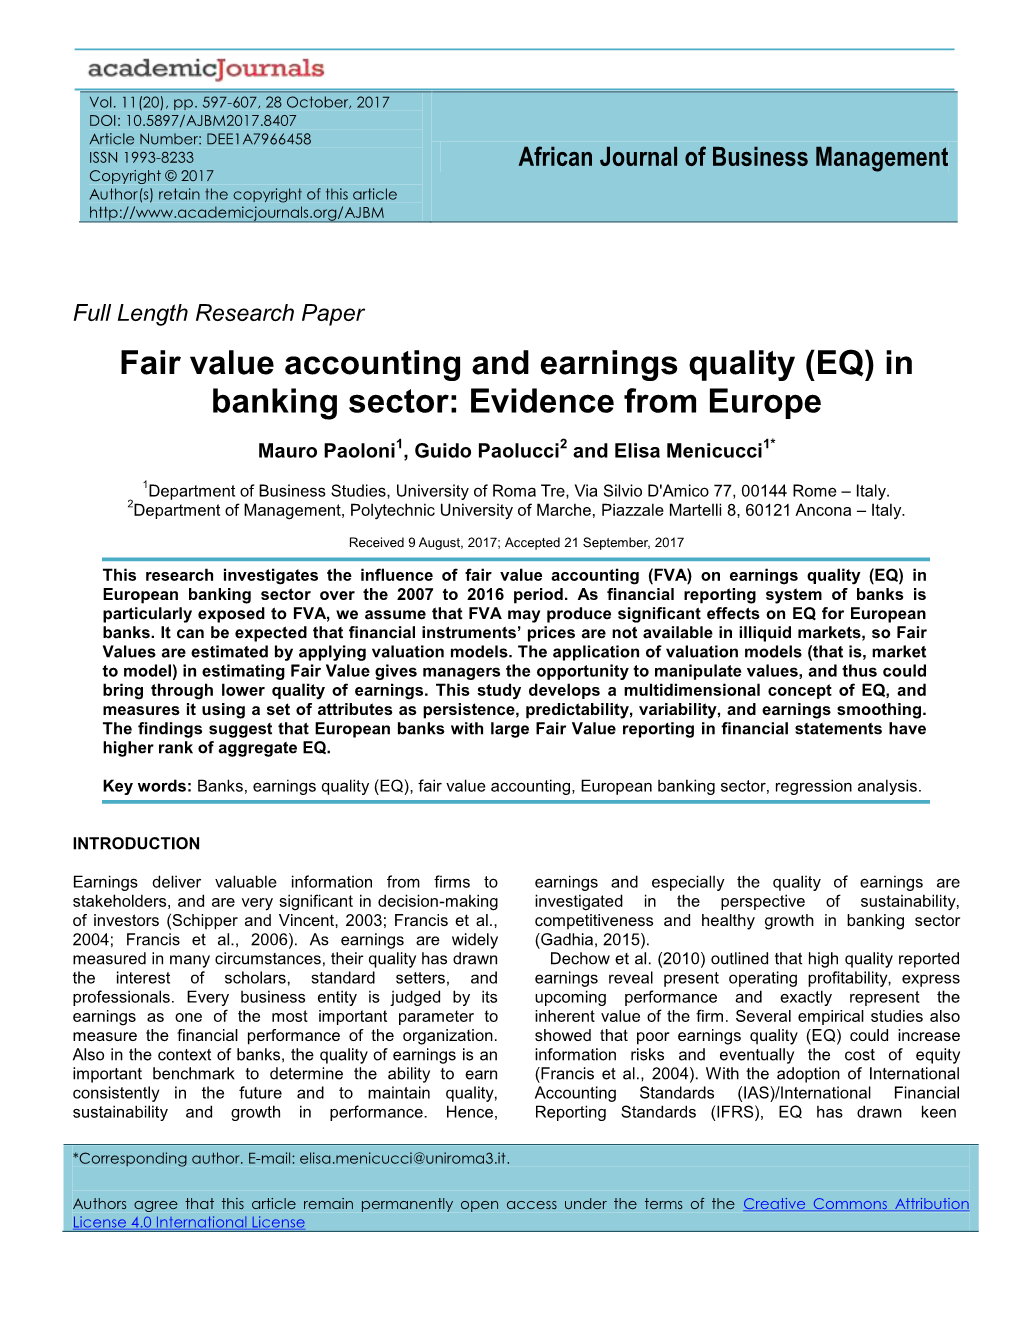 Fair Value Accounting and Earnings Quality (EQ) in Banking Sector: Evidence from Europe